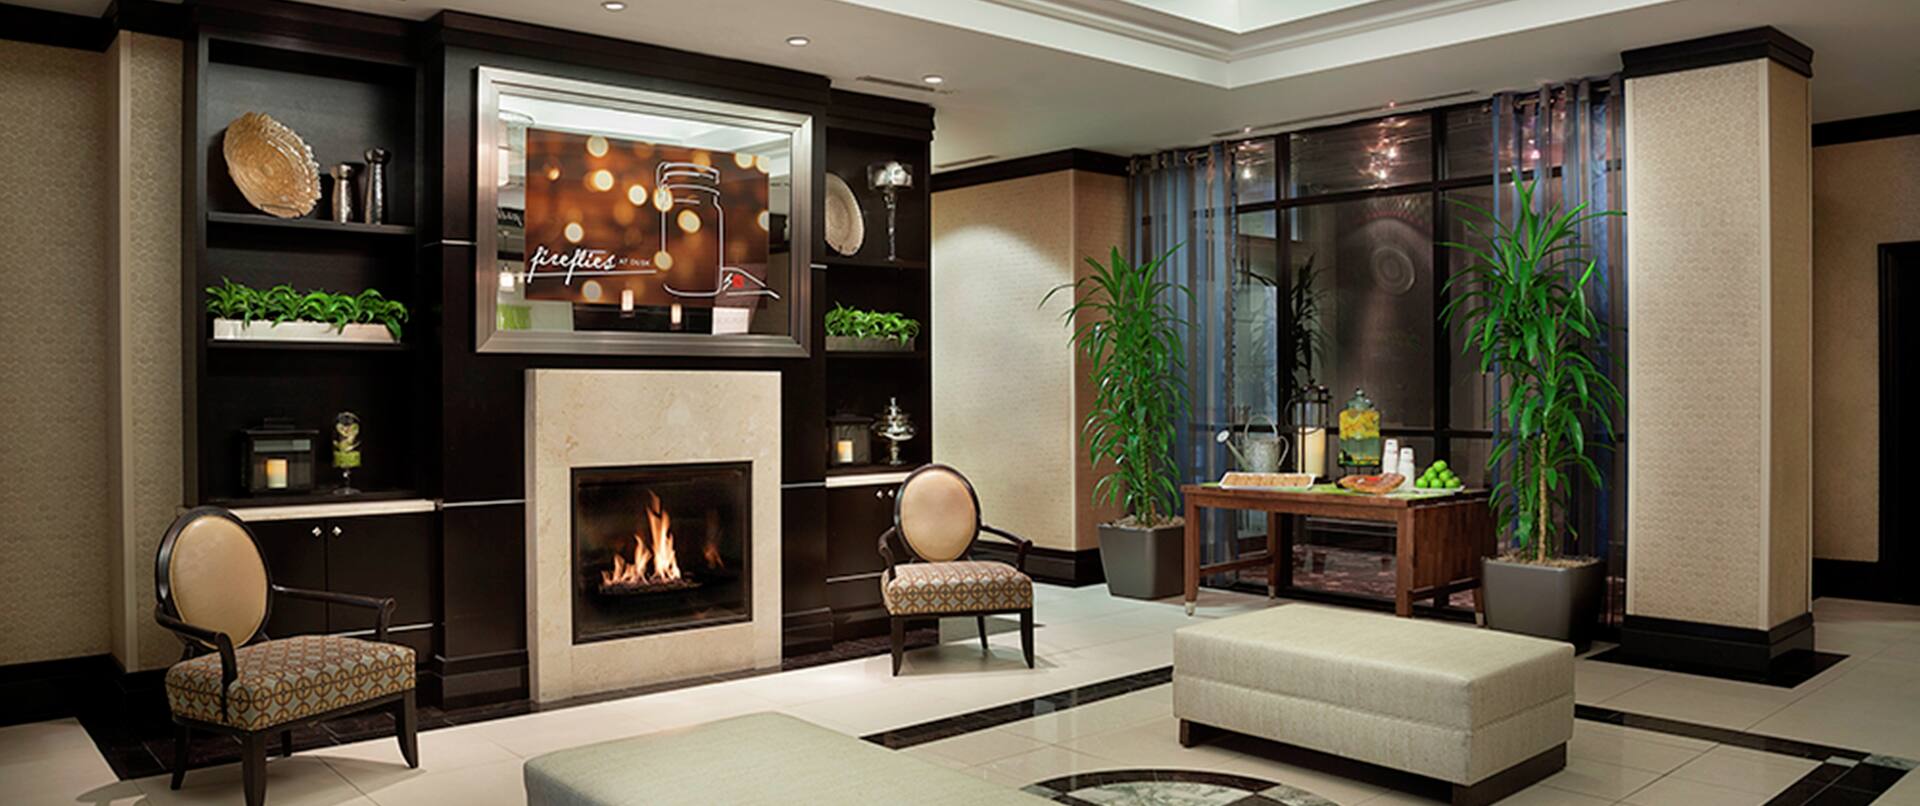 Hotel Lobby with Fireplace